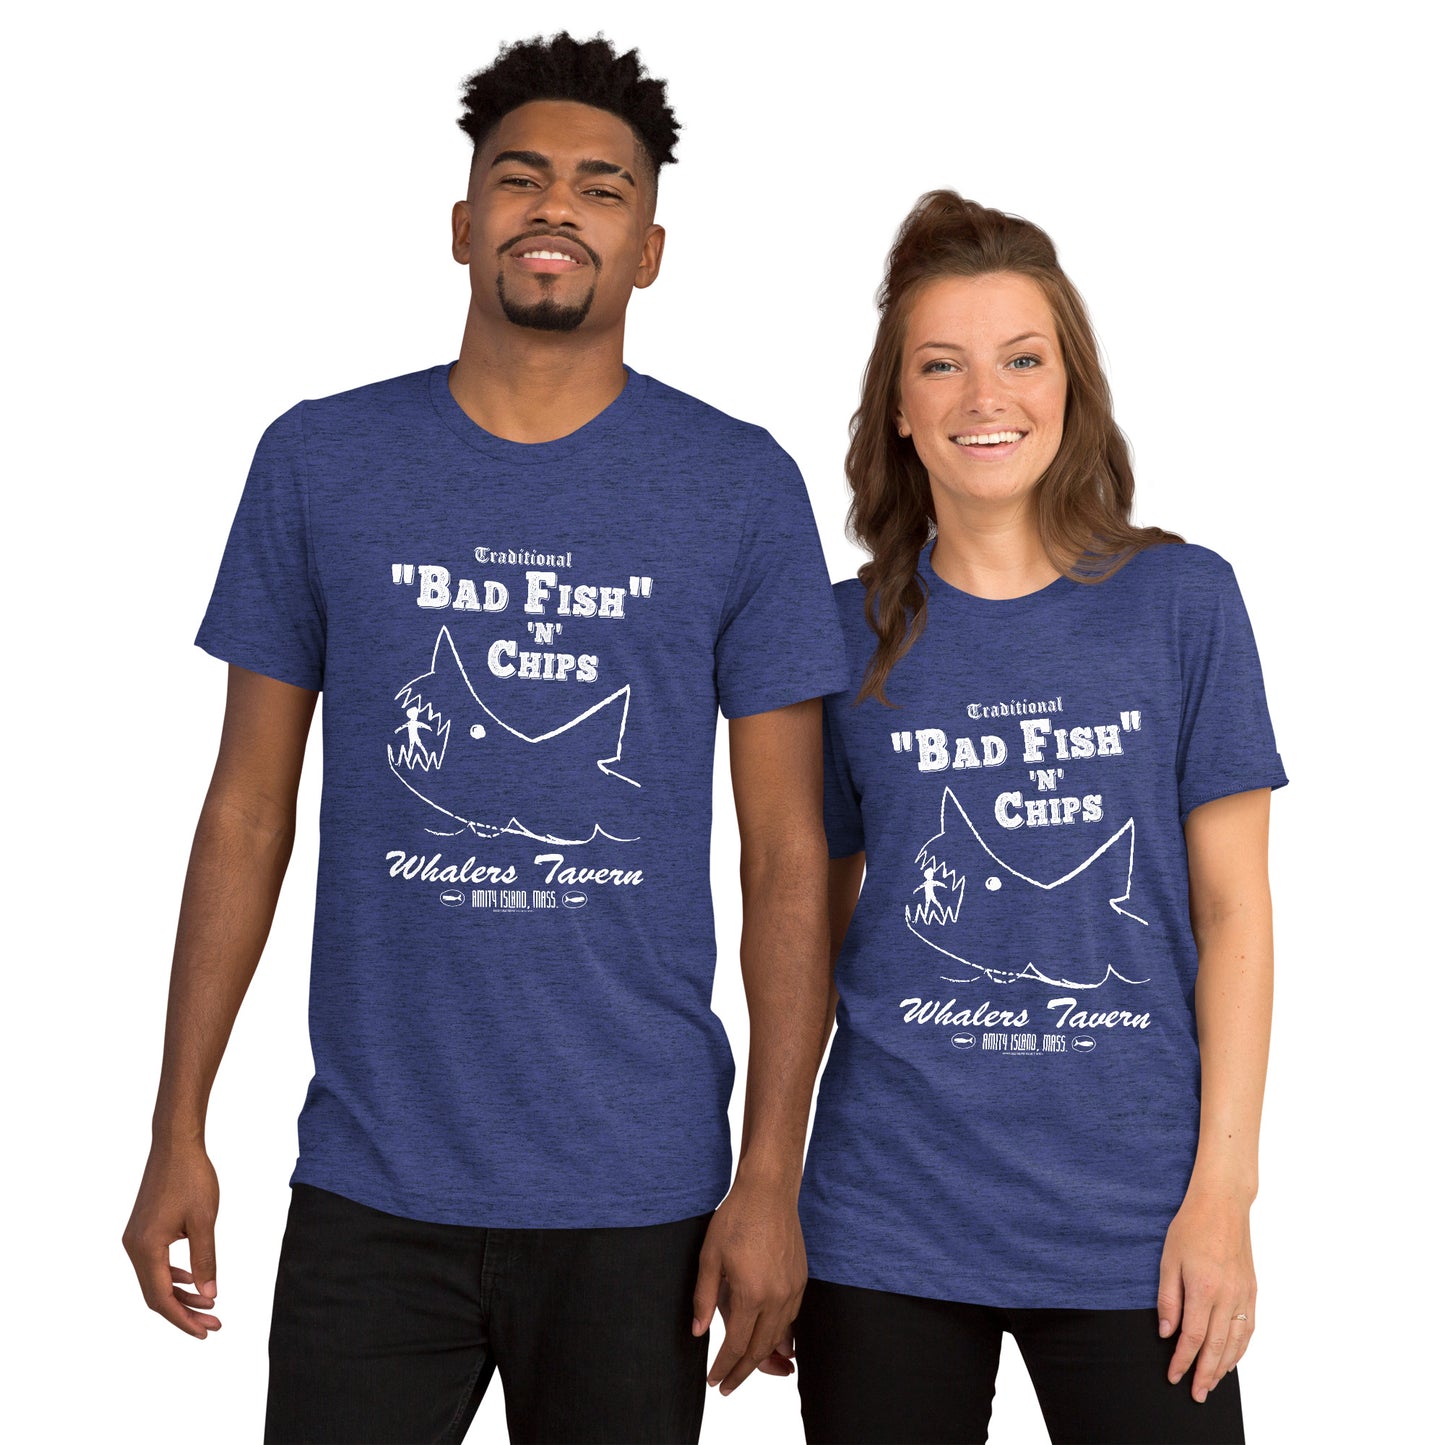 Quint's Bad Fish N' Chips JAWS Inspired Short sleeve t-shirt